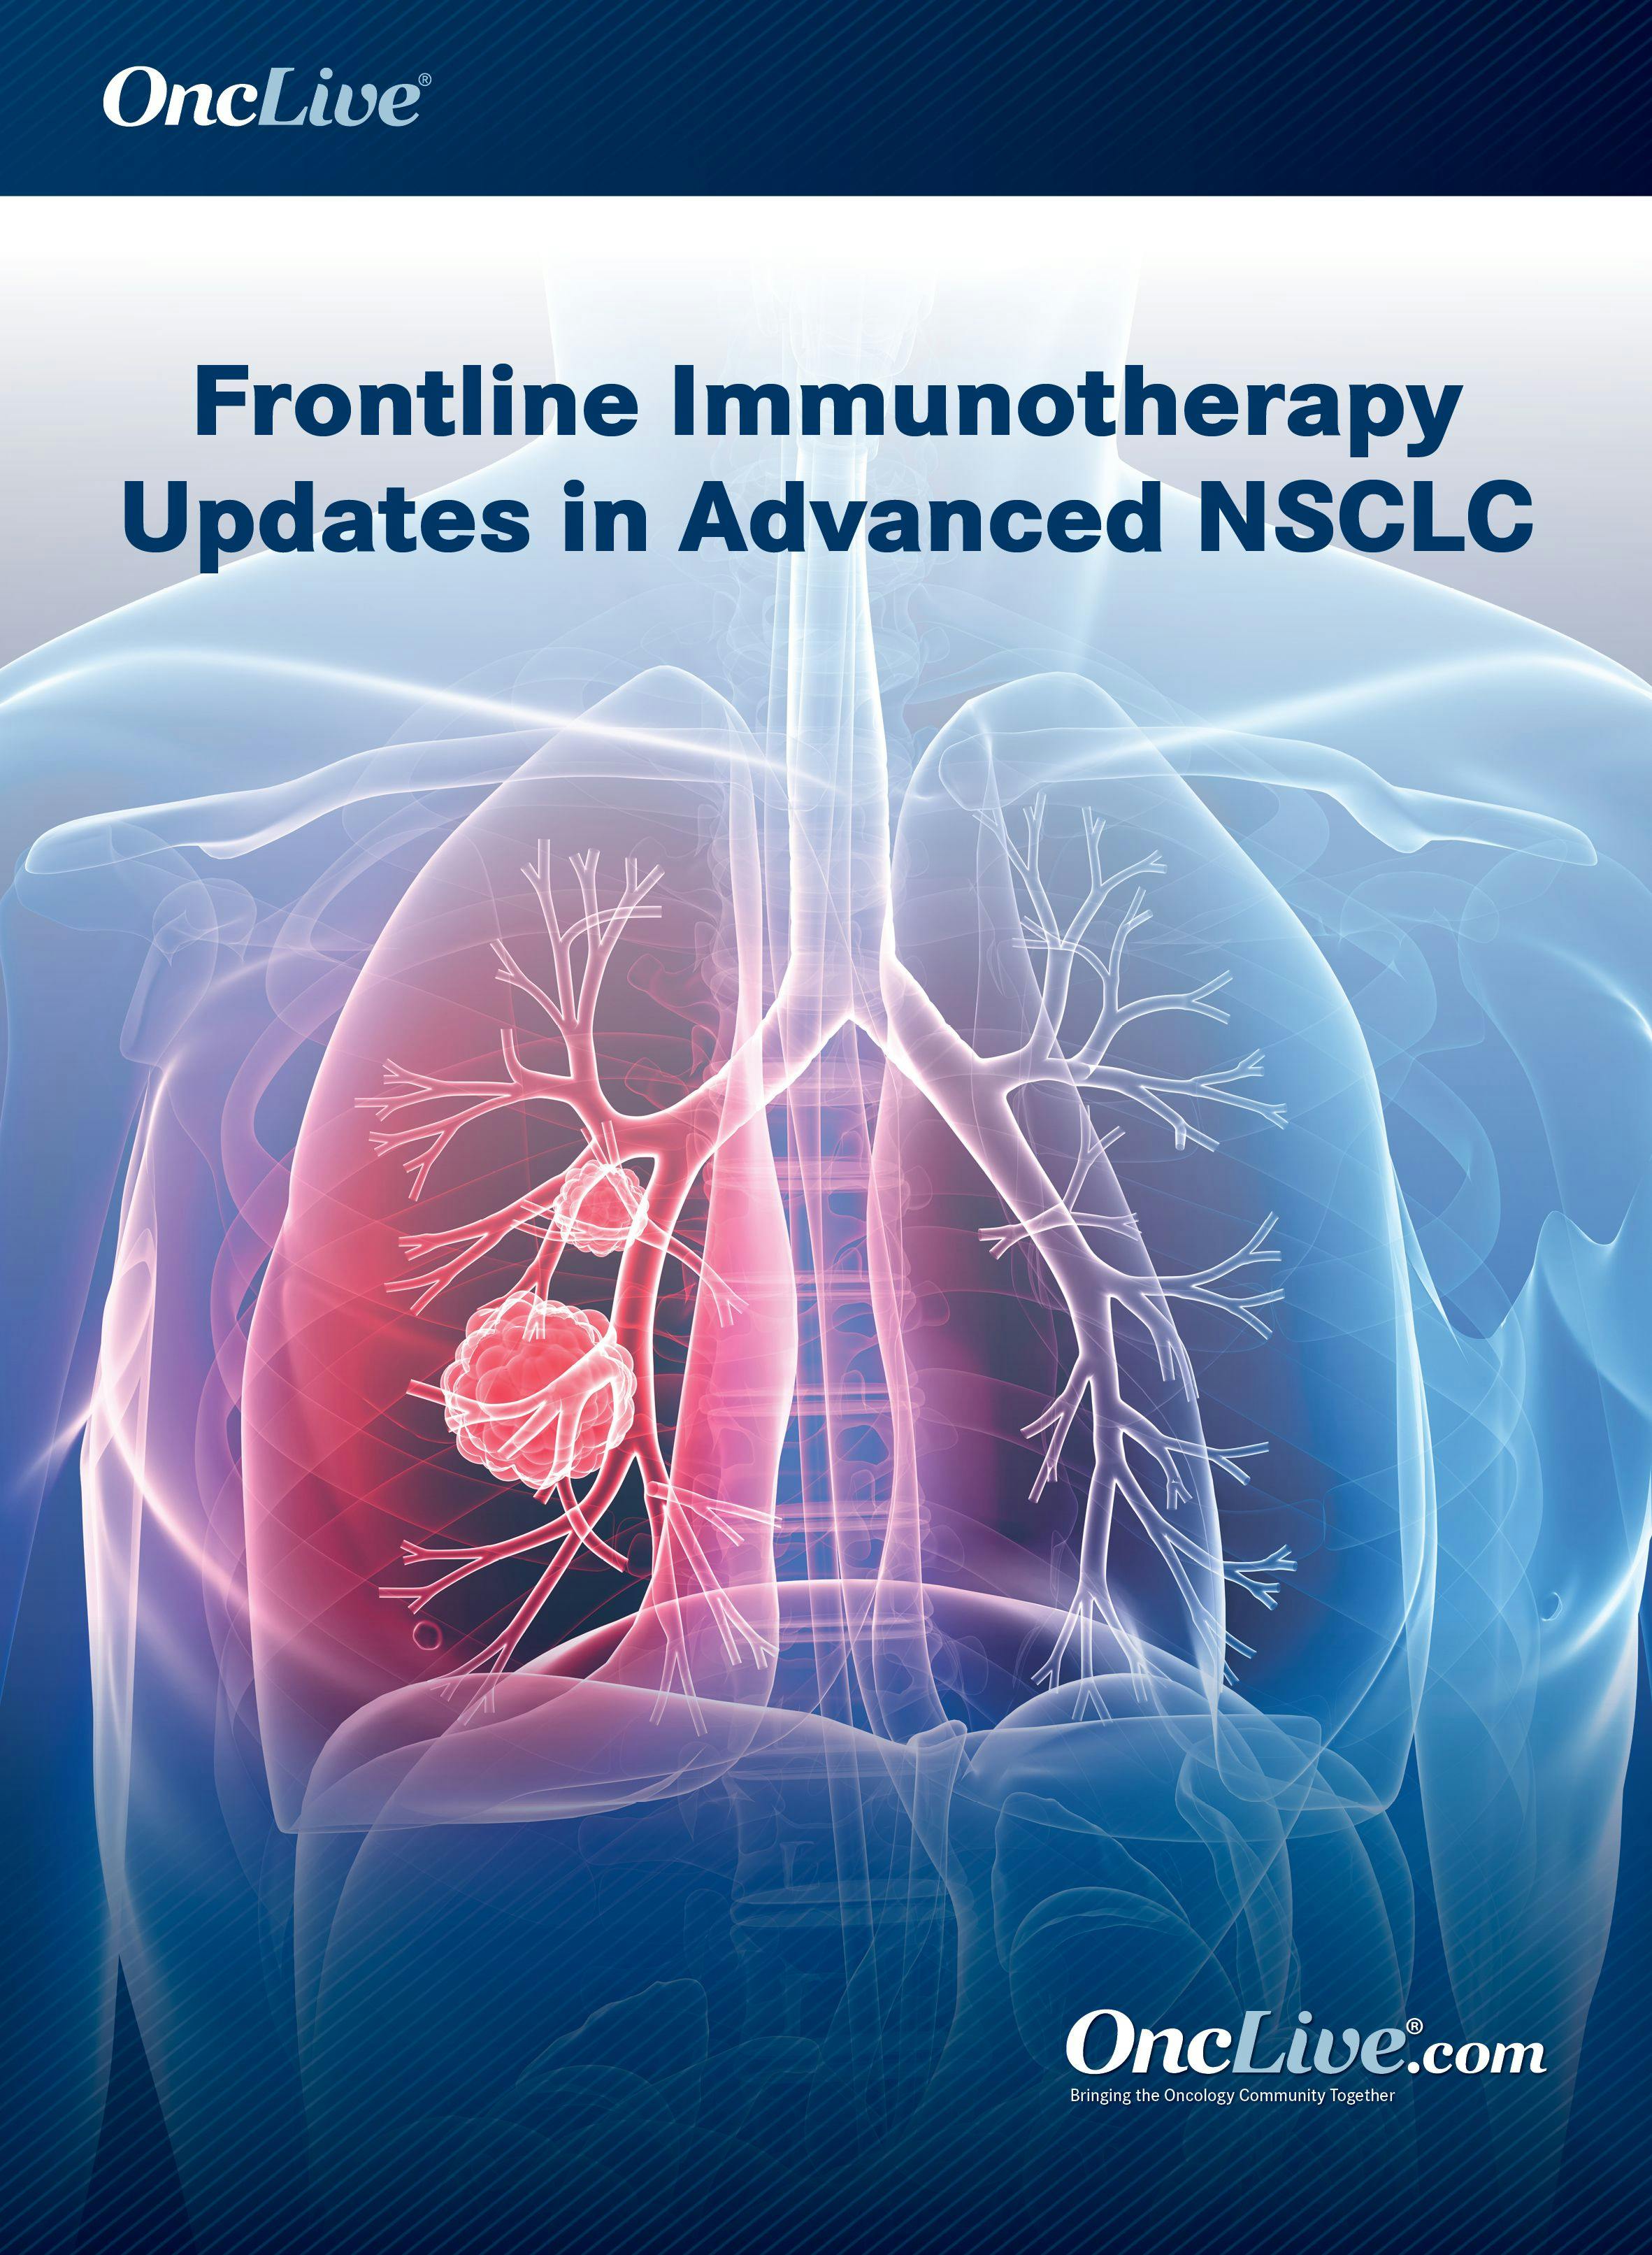 Frontline Immunotherapy Updates in Advanced NSCLC